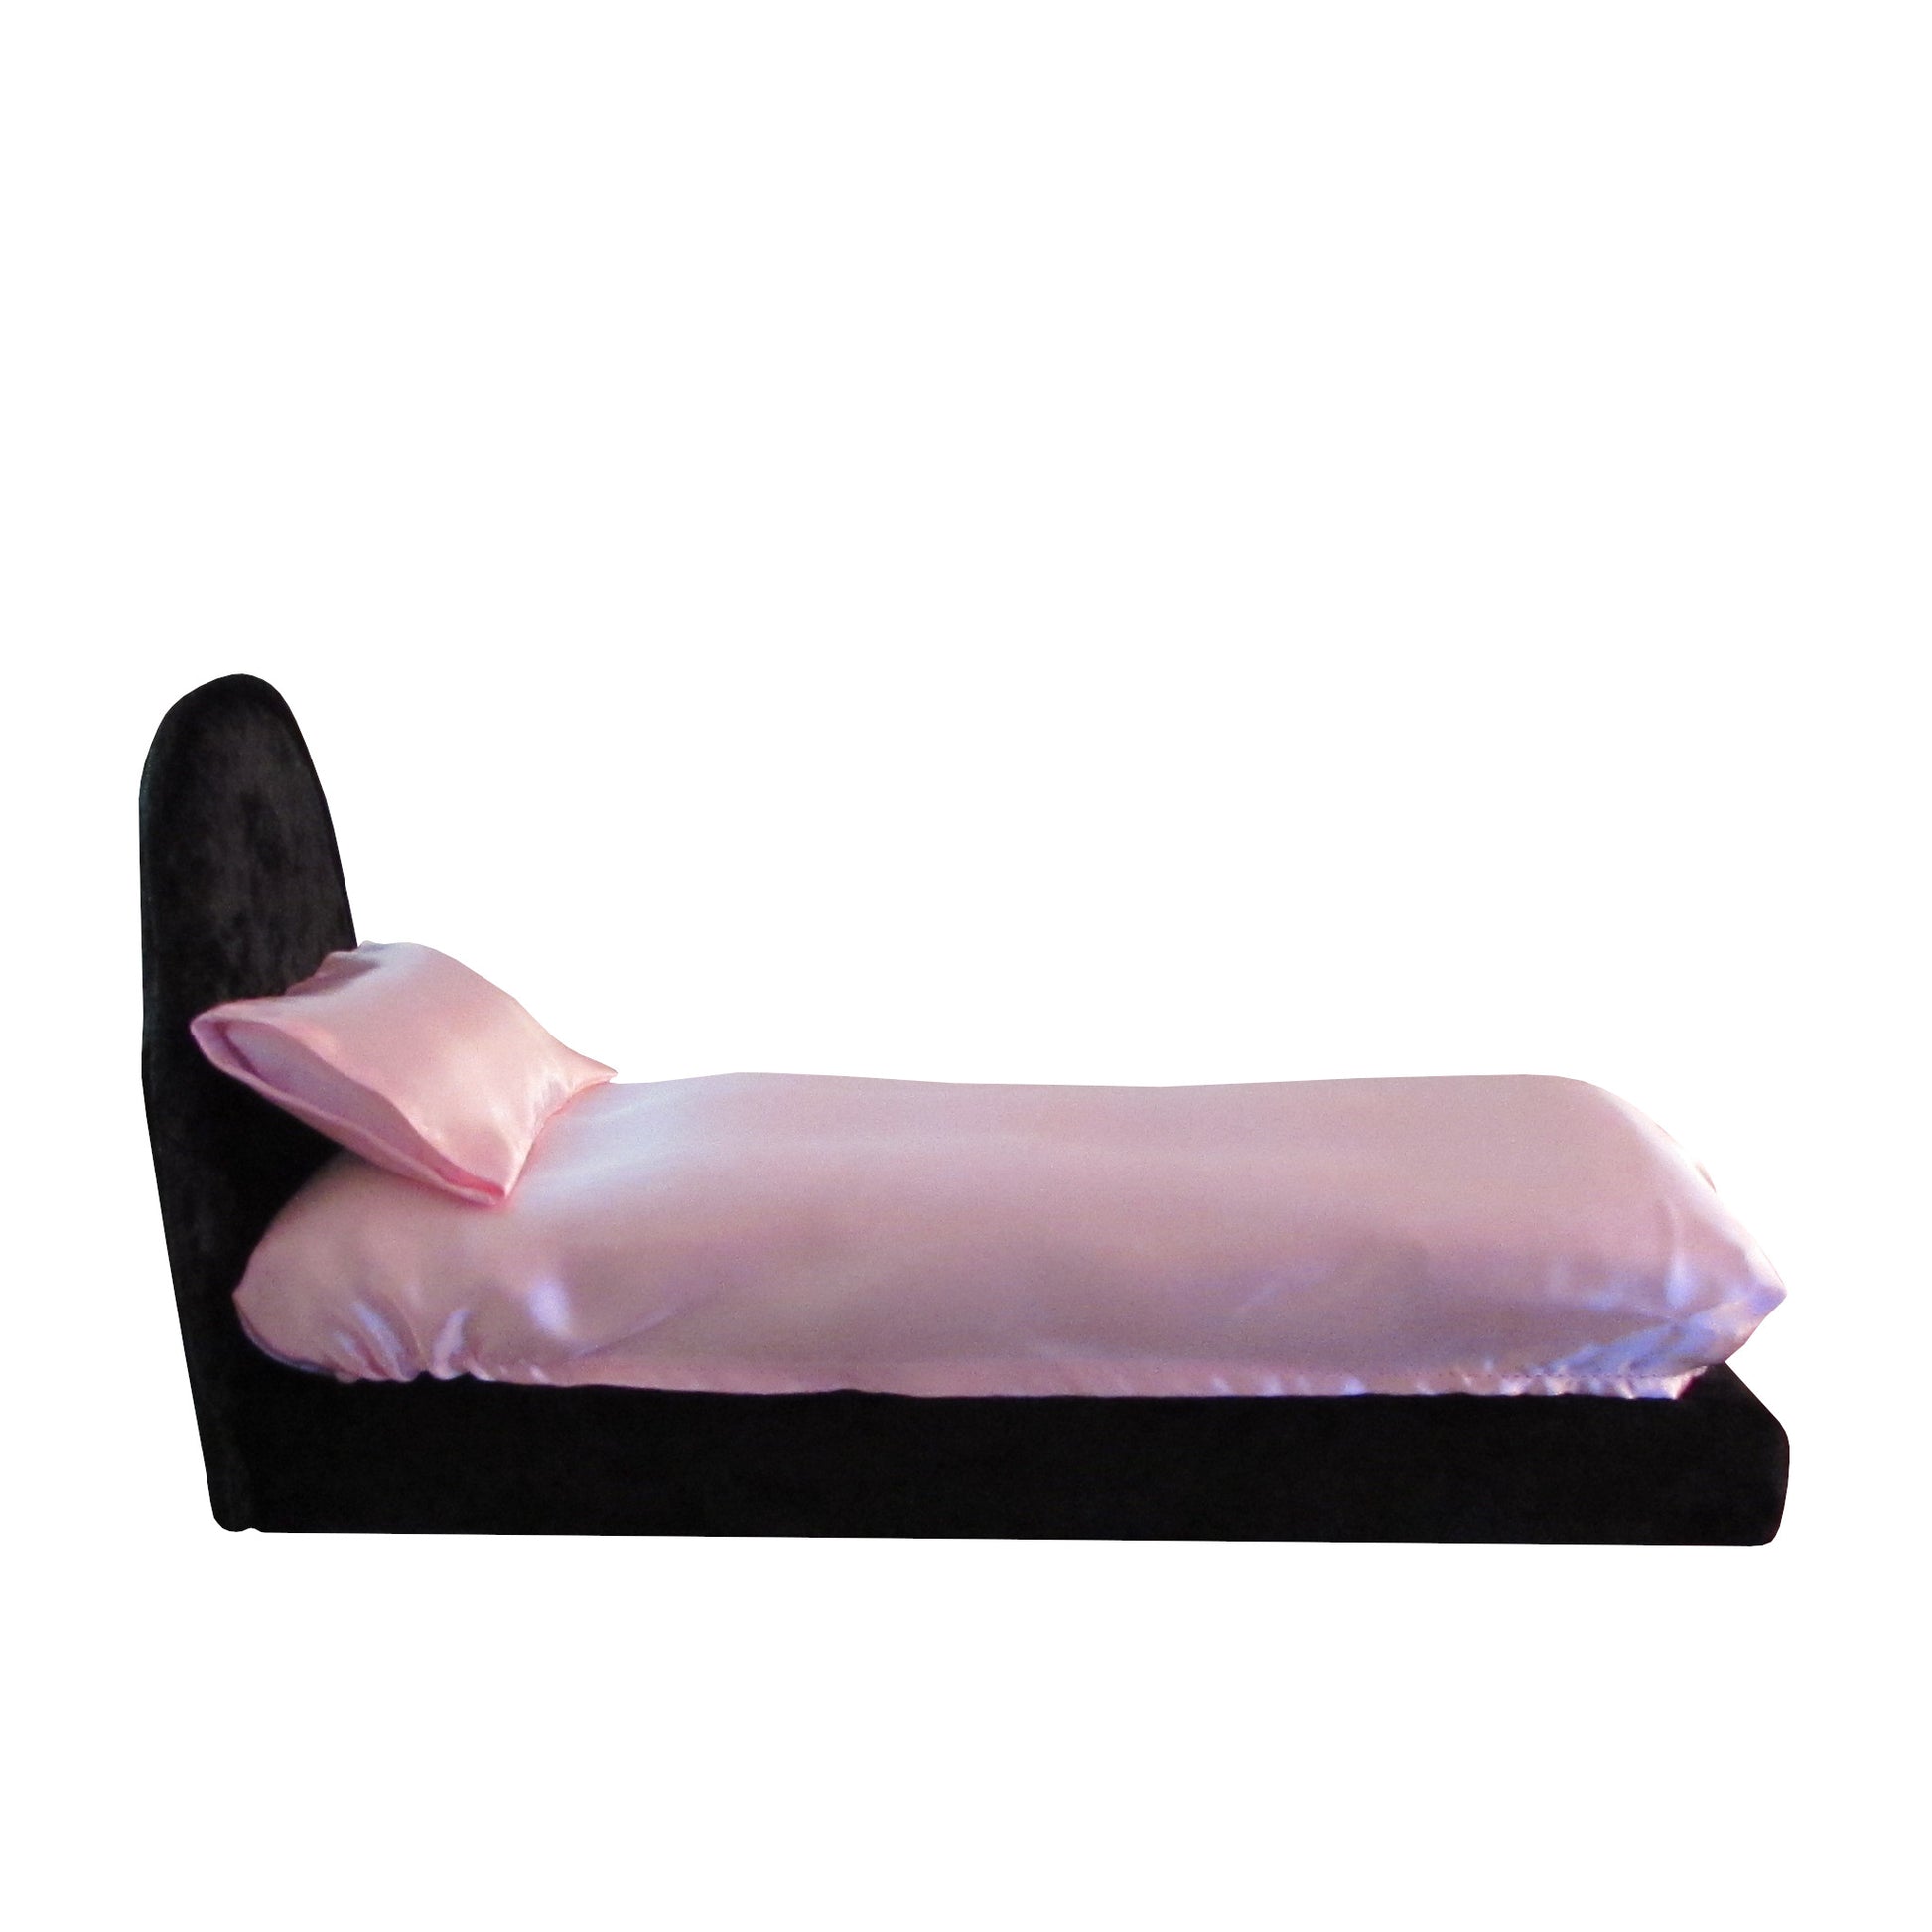 Light Pink Satin Fitted Sheet and Pillowcase with Black Crushed Velvet Doll Bed for 11.5-inch and 12-inch dolls Side view